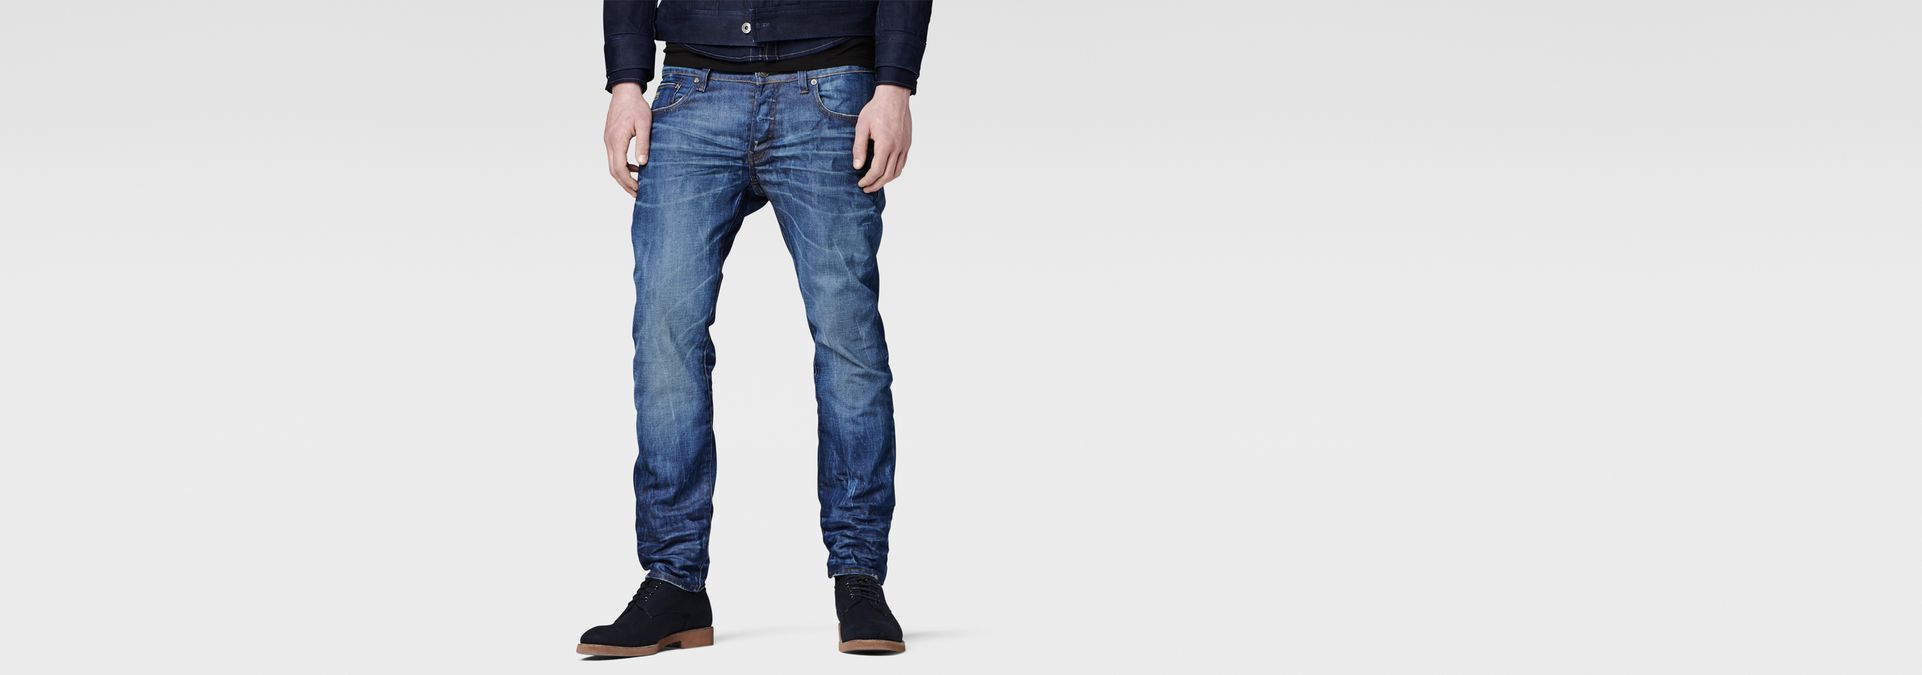 g star 3301 low tapered mens jeans